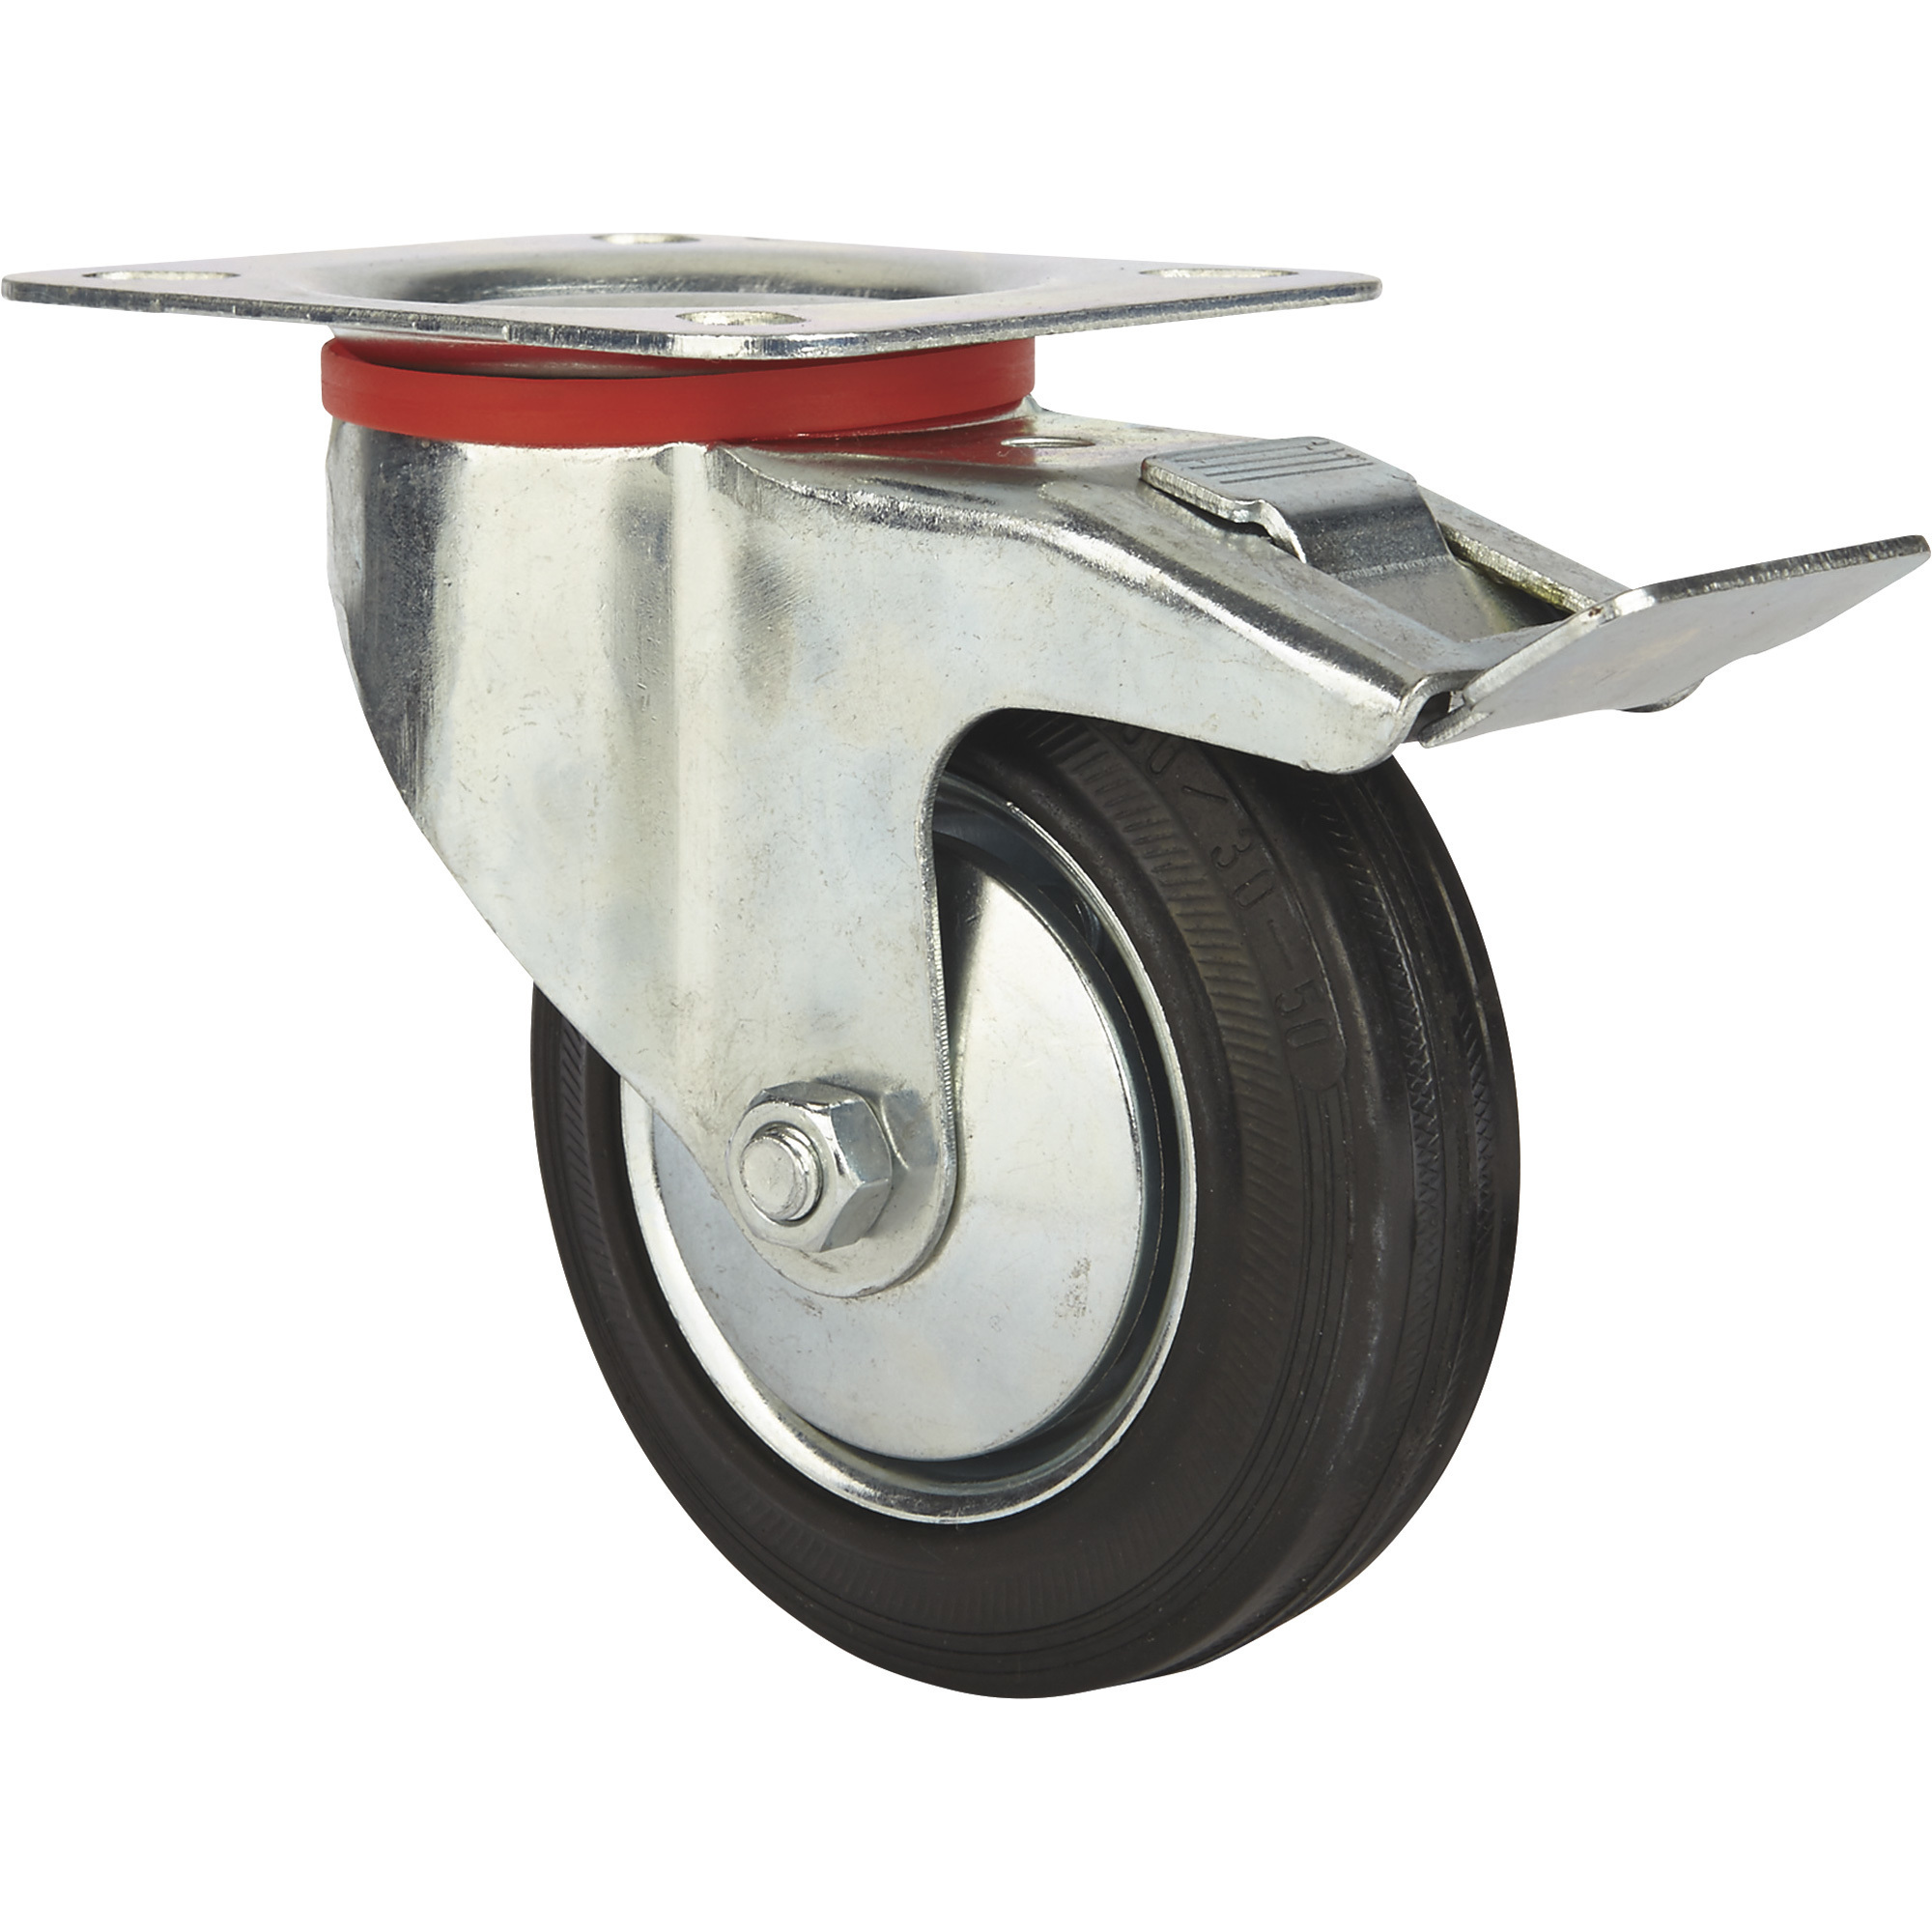 Ironton 4Inch Swivel Rubber Caster with Brake, 155-Lb. Capacity